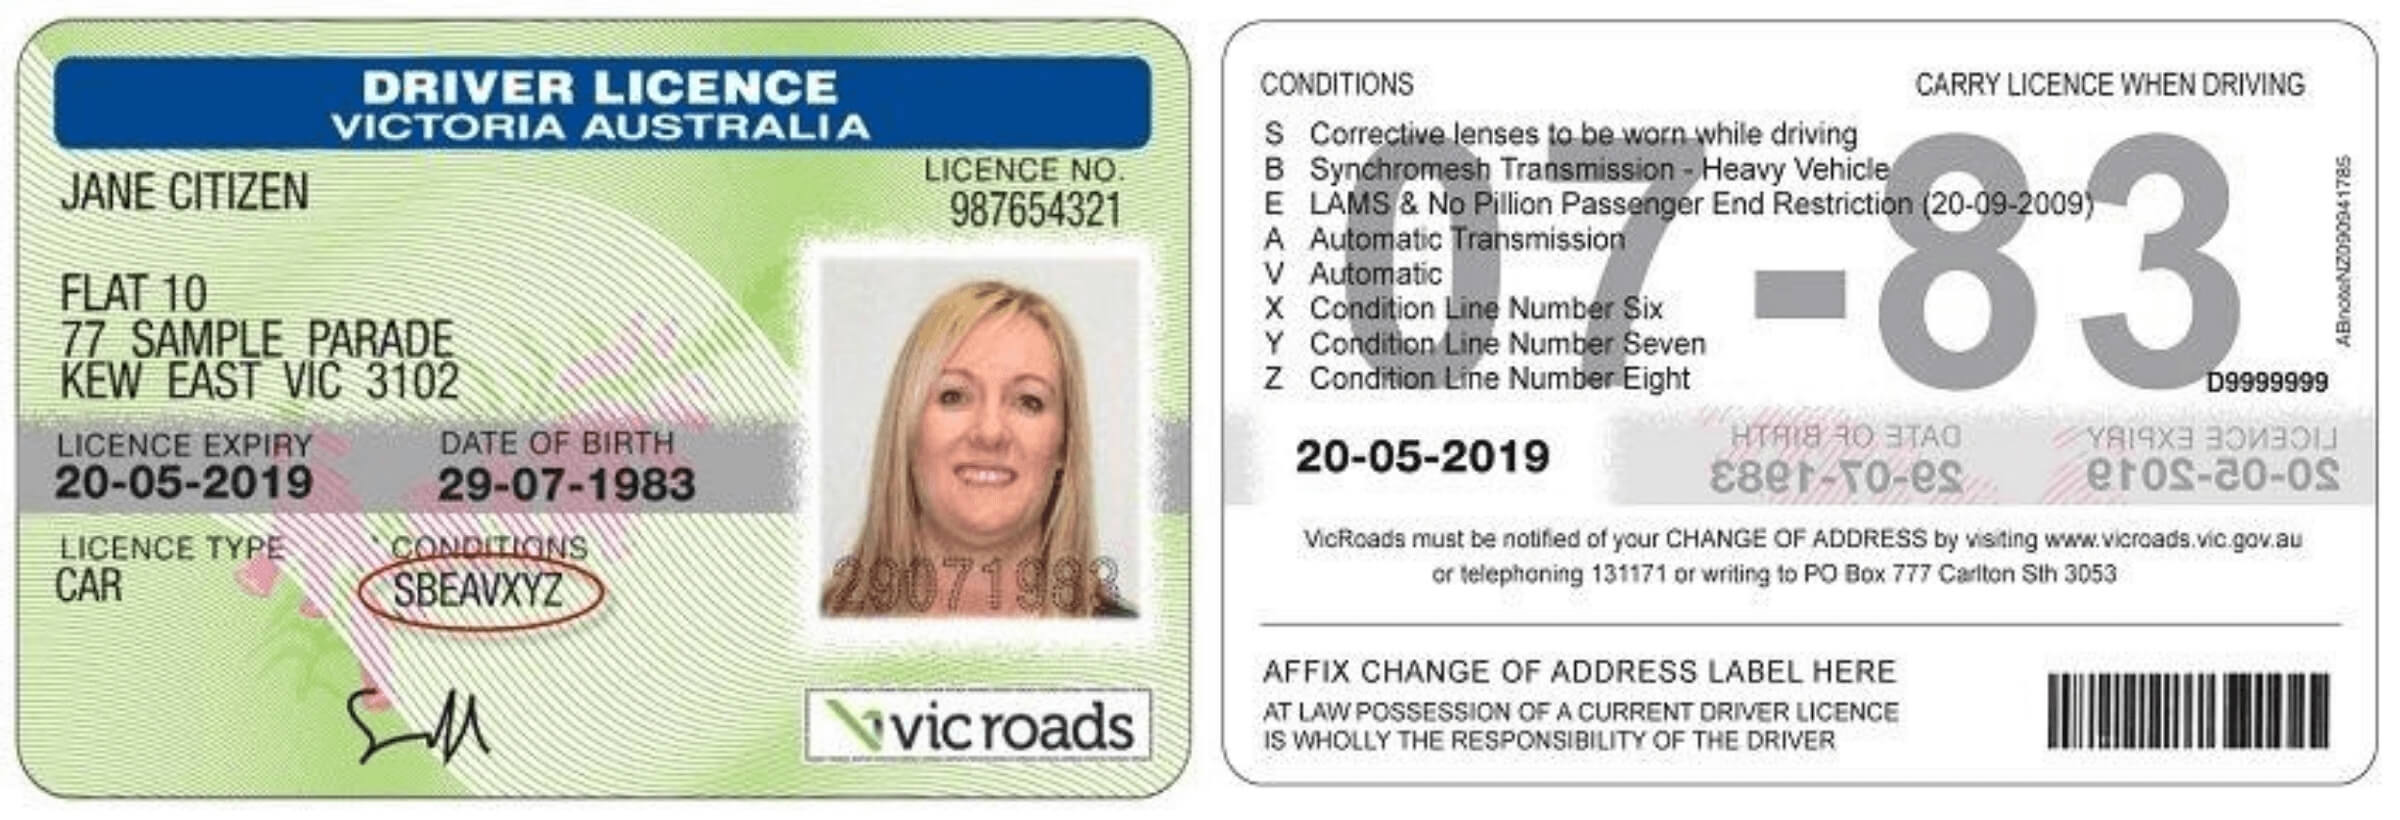 Sample VicRoads drivers licence showing conditions printed on the front and back